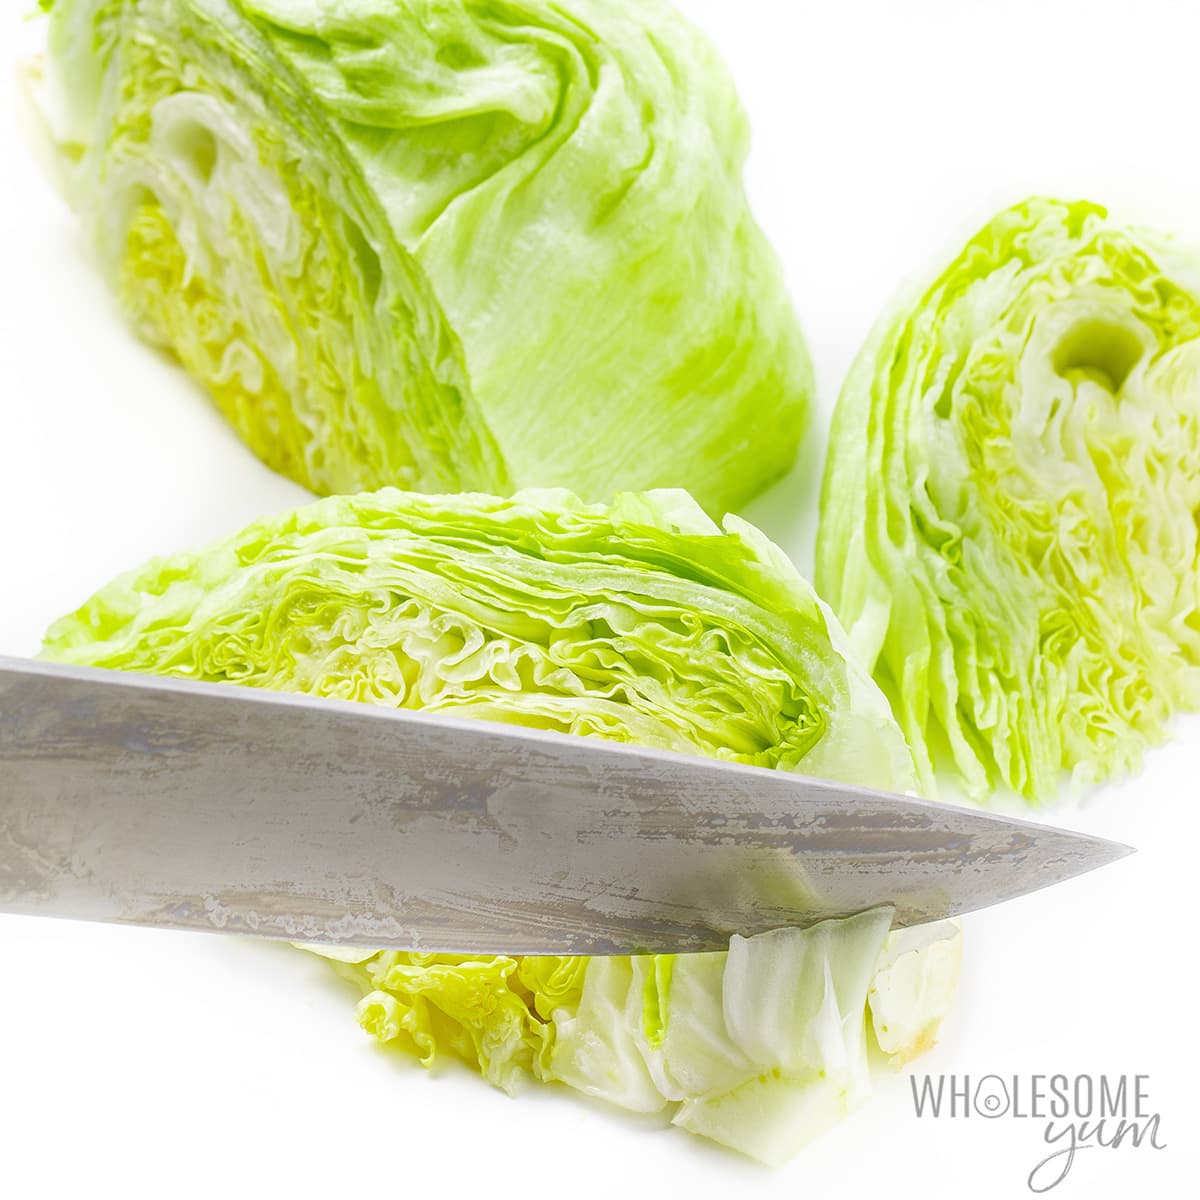 Cutting iceberg lettuce into wedges with a knife.